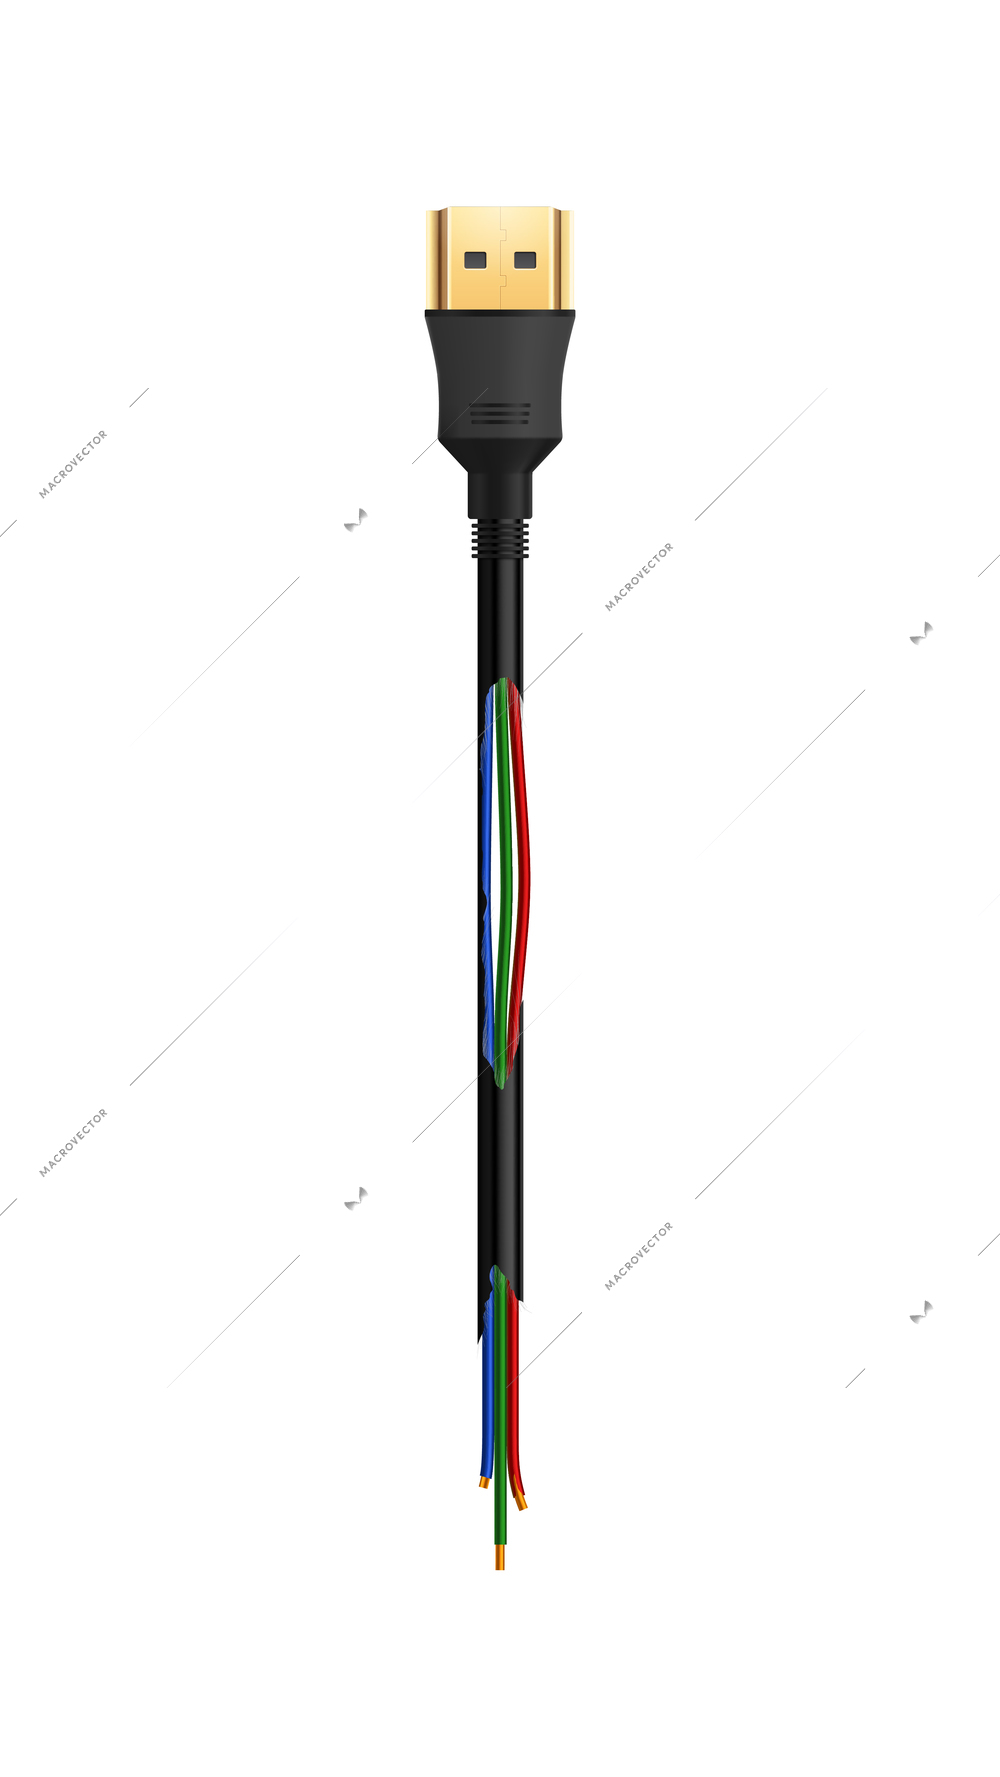 Realistic damaged usb cable on white background vector illustration